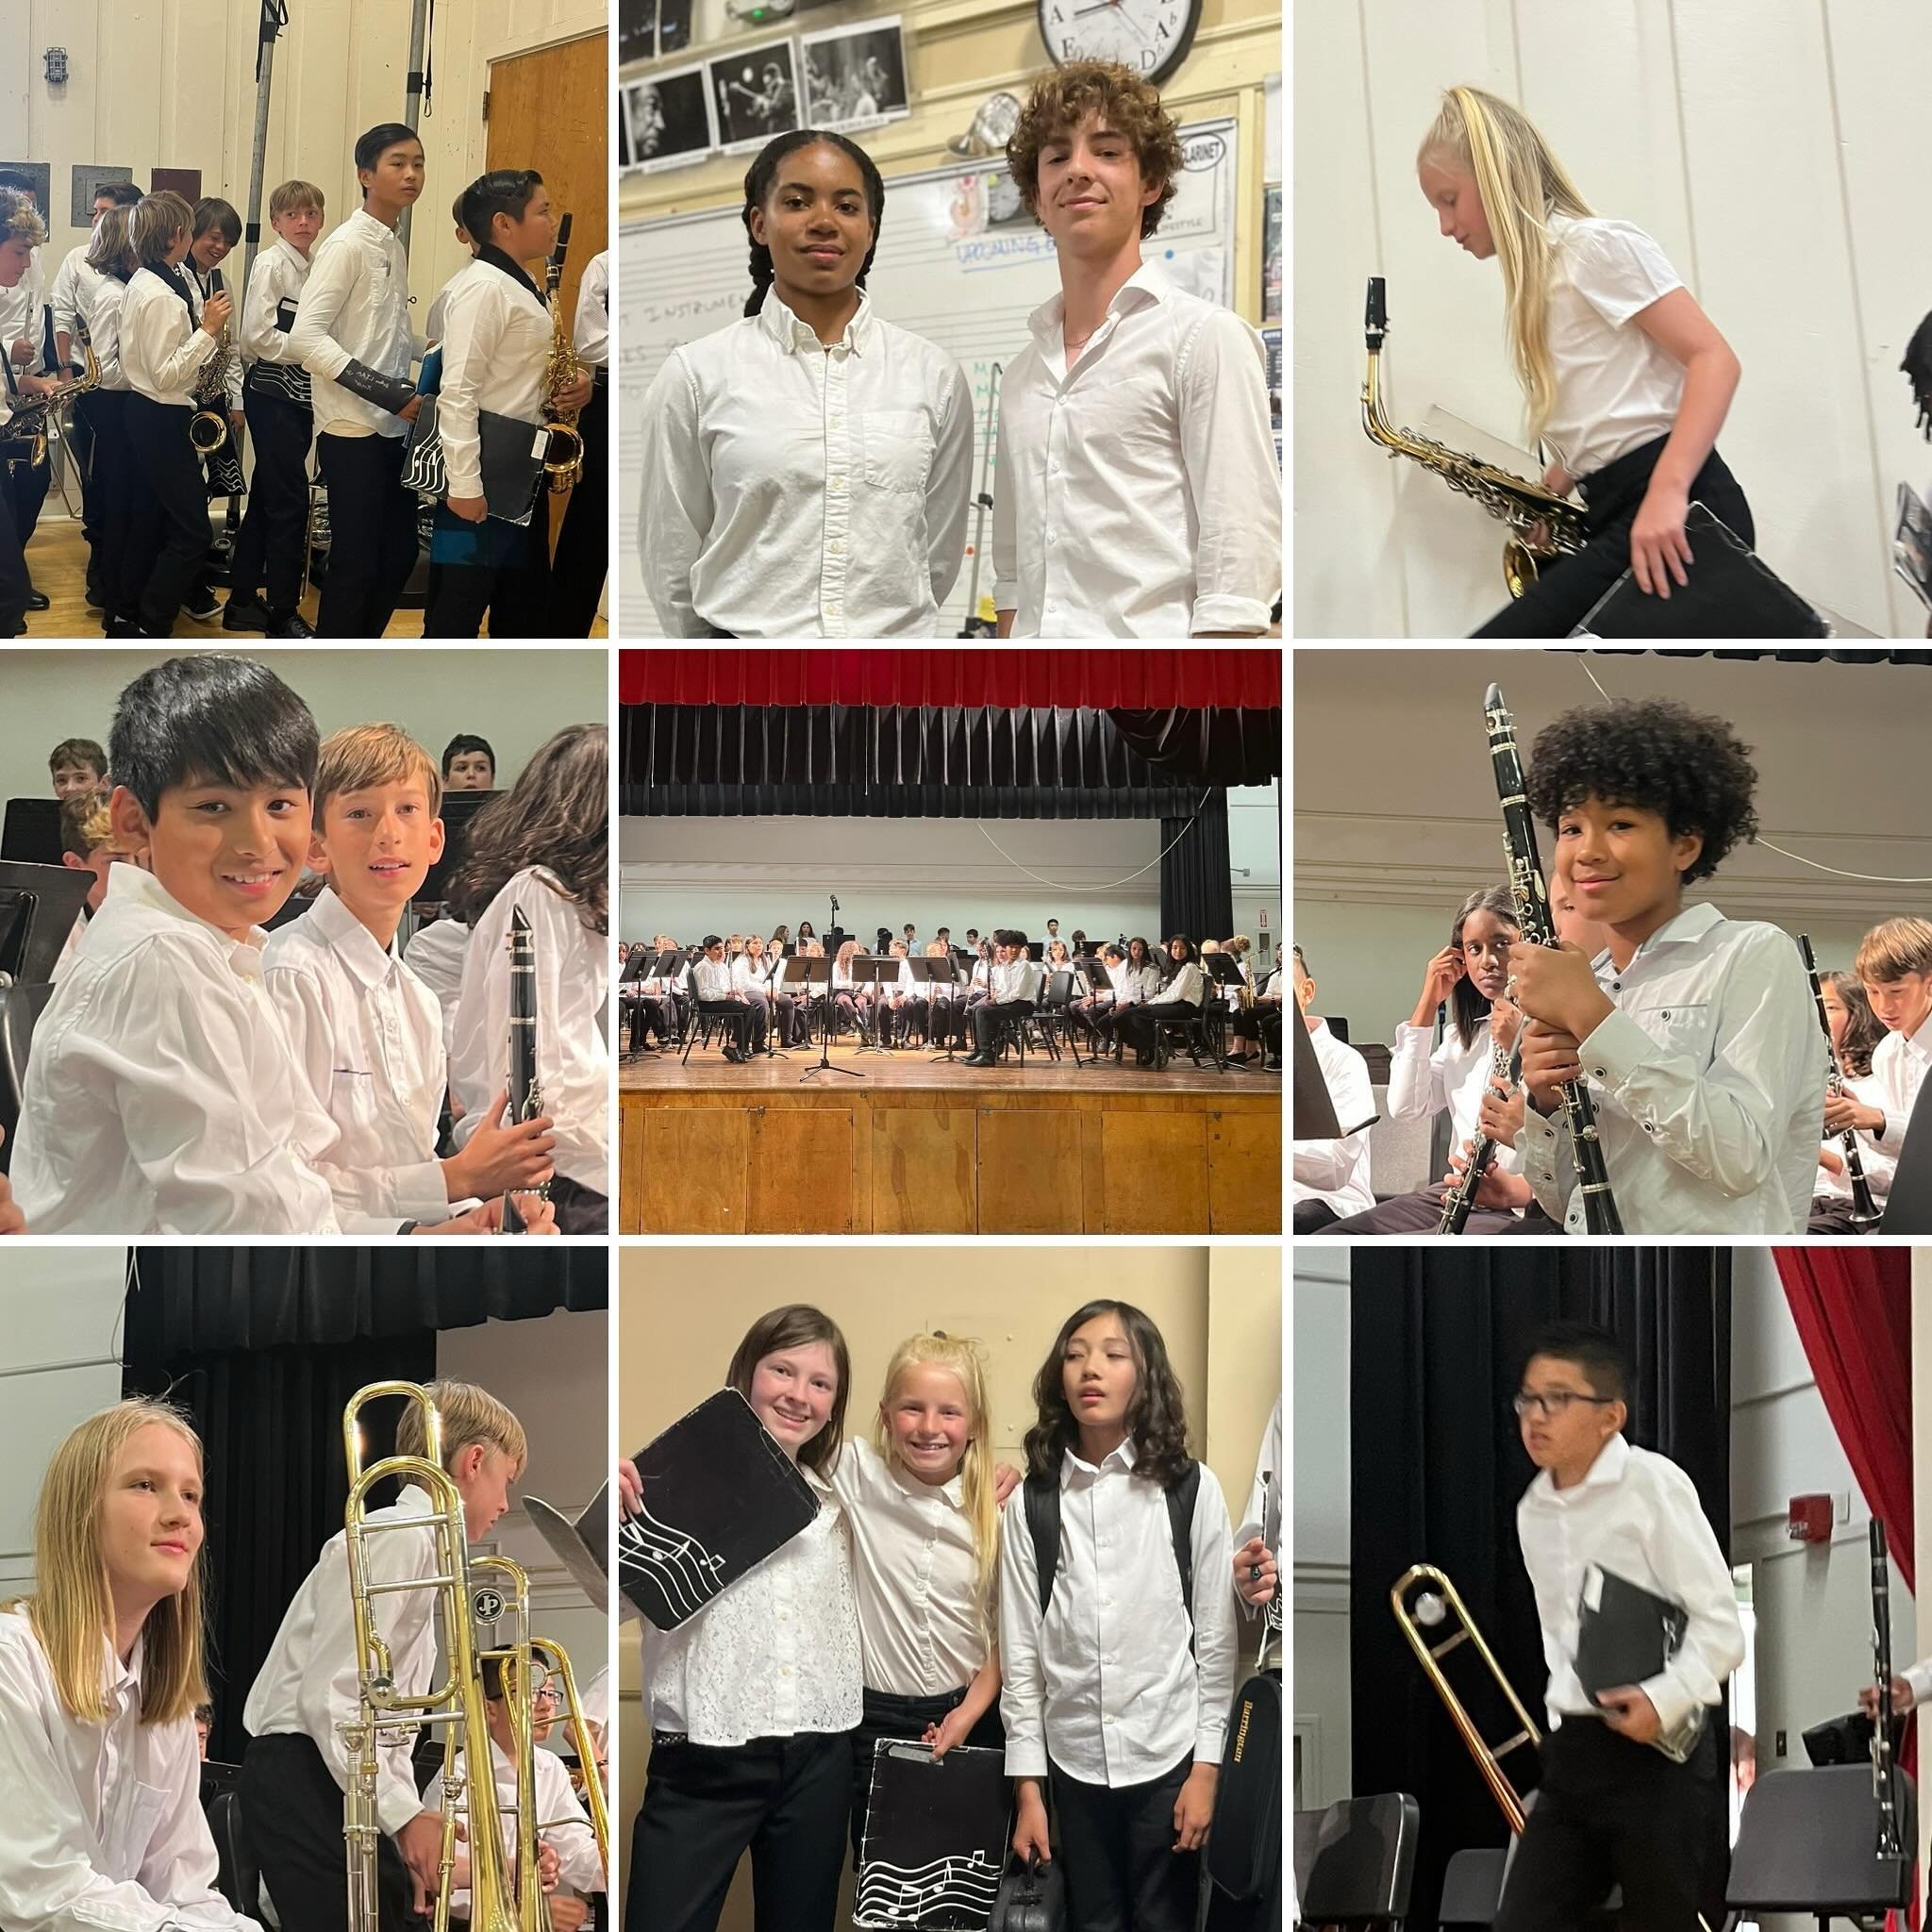 Final band concert last night! The school year is wrapping up! #Ednabrewer